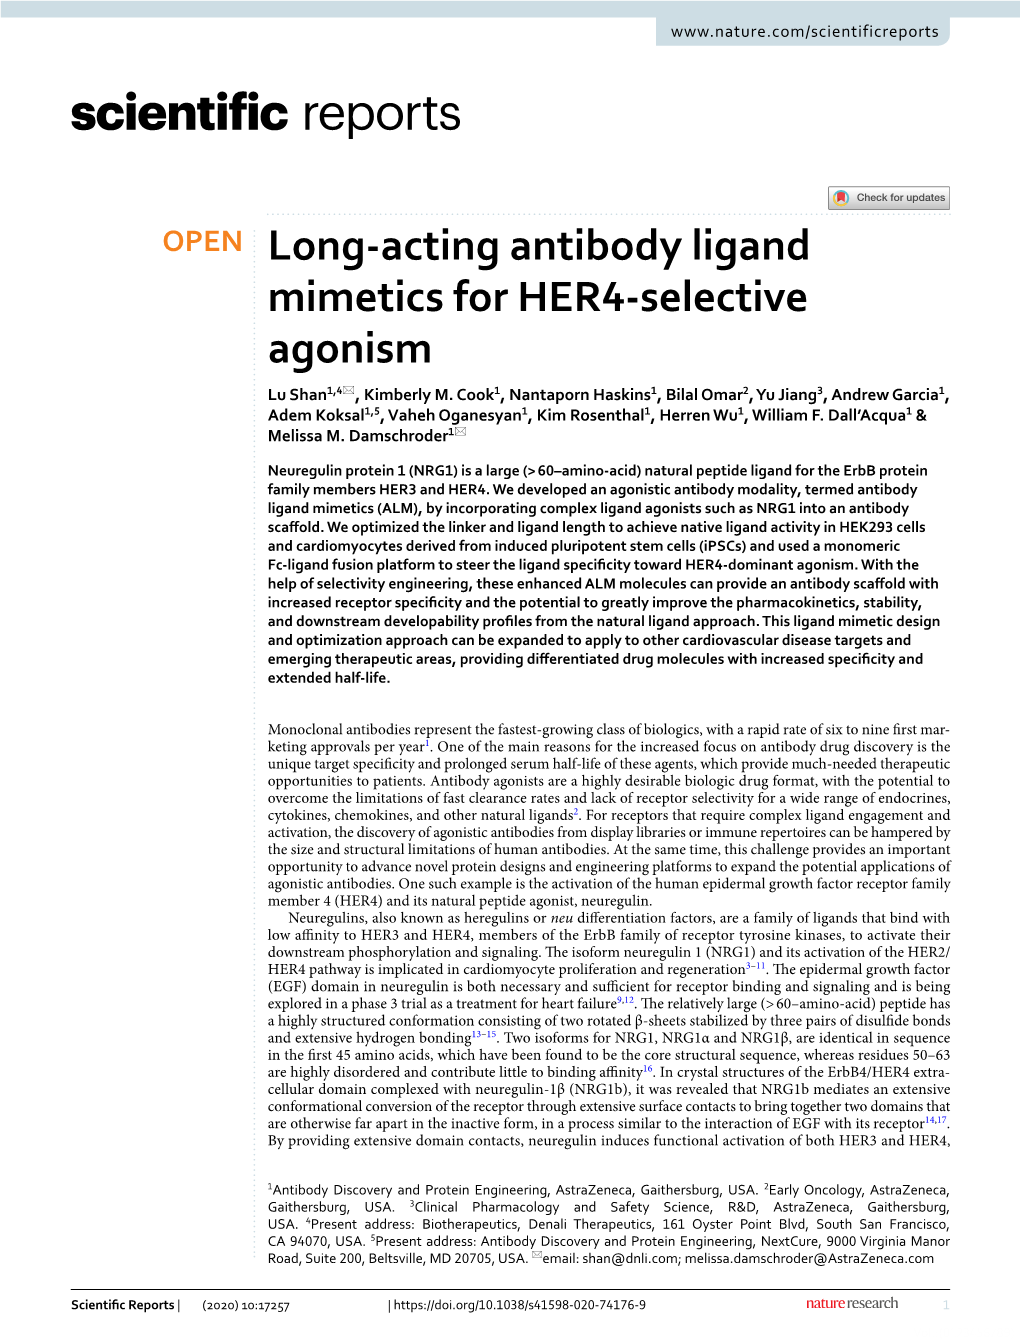 Long-Acting Antibody Ligand Mimetics for HER4-Selective Agonism